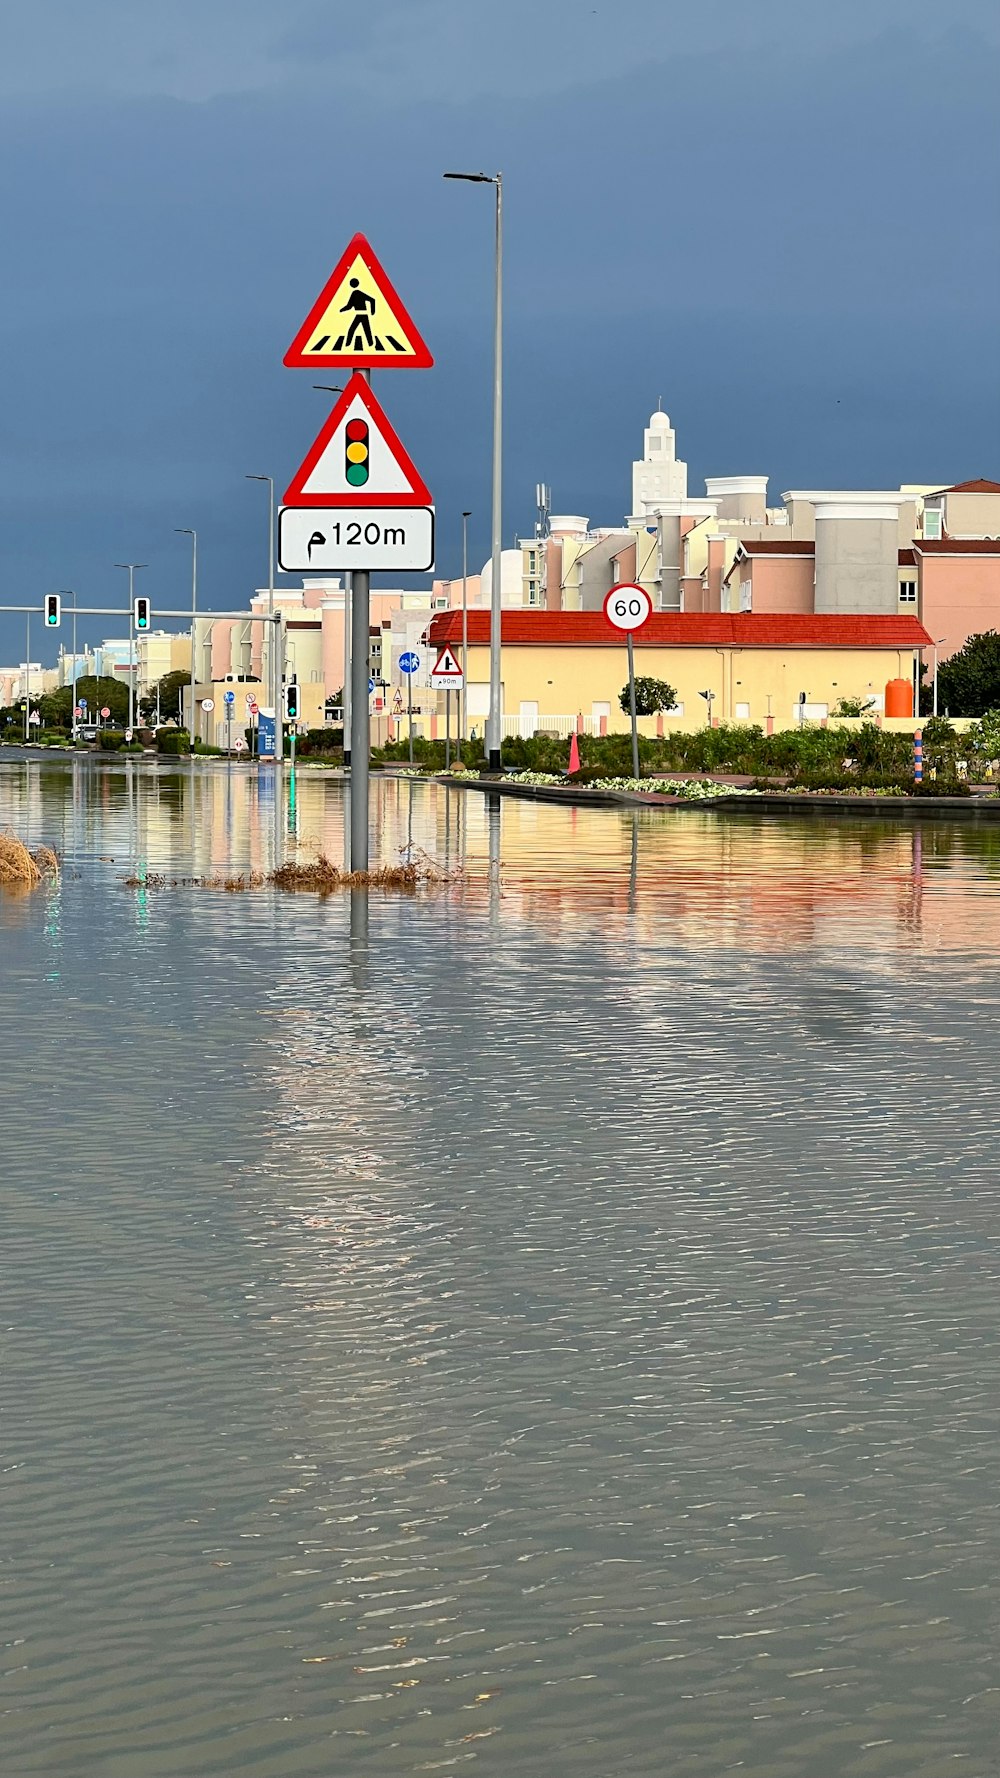 a street sign in the middle of a flooded street